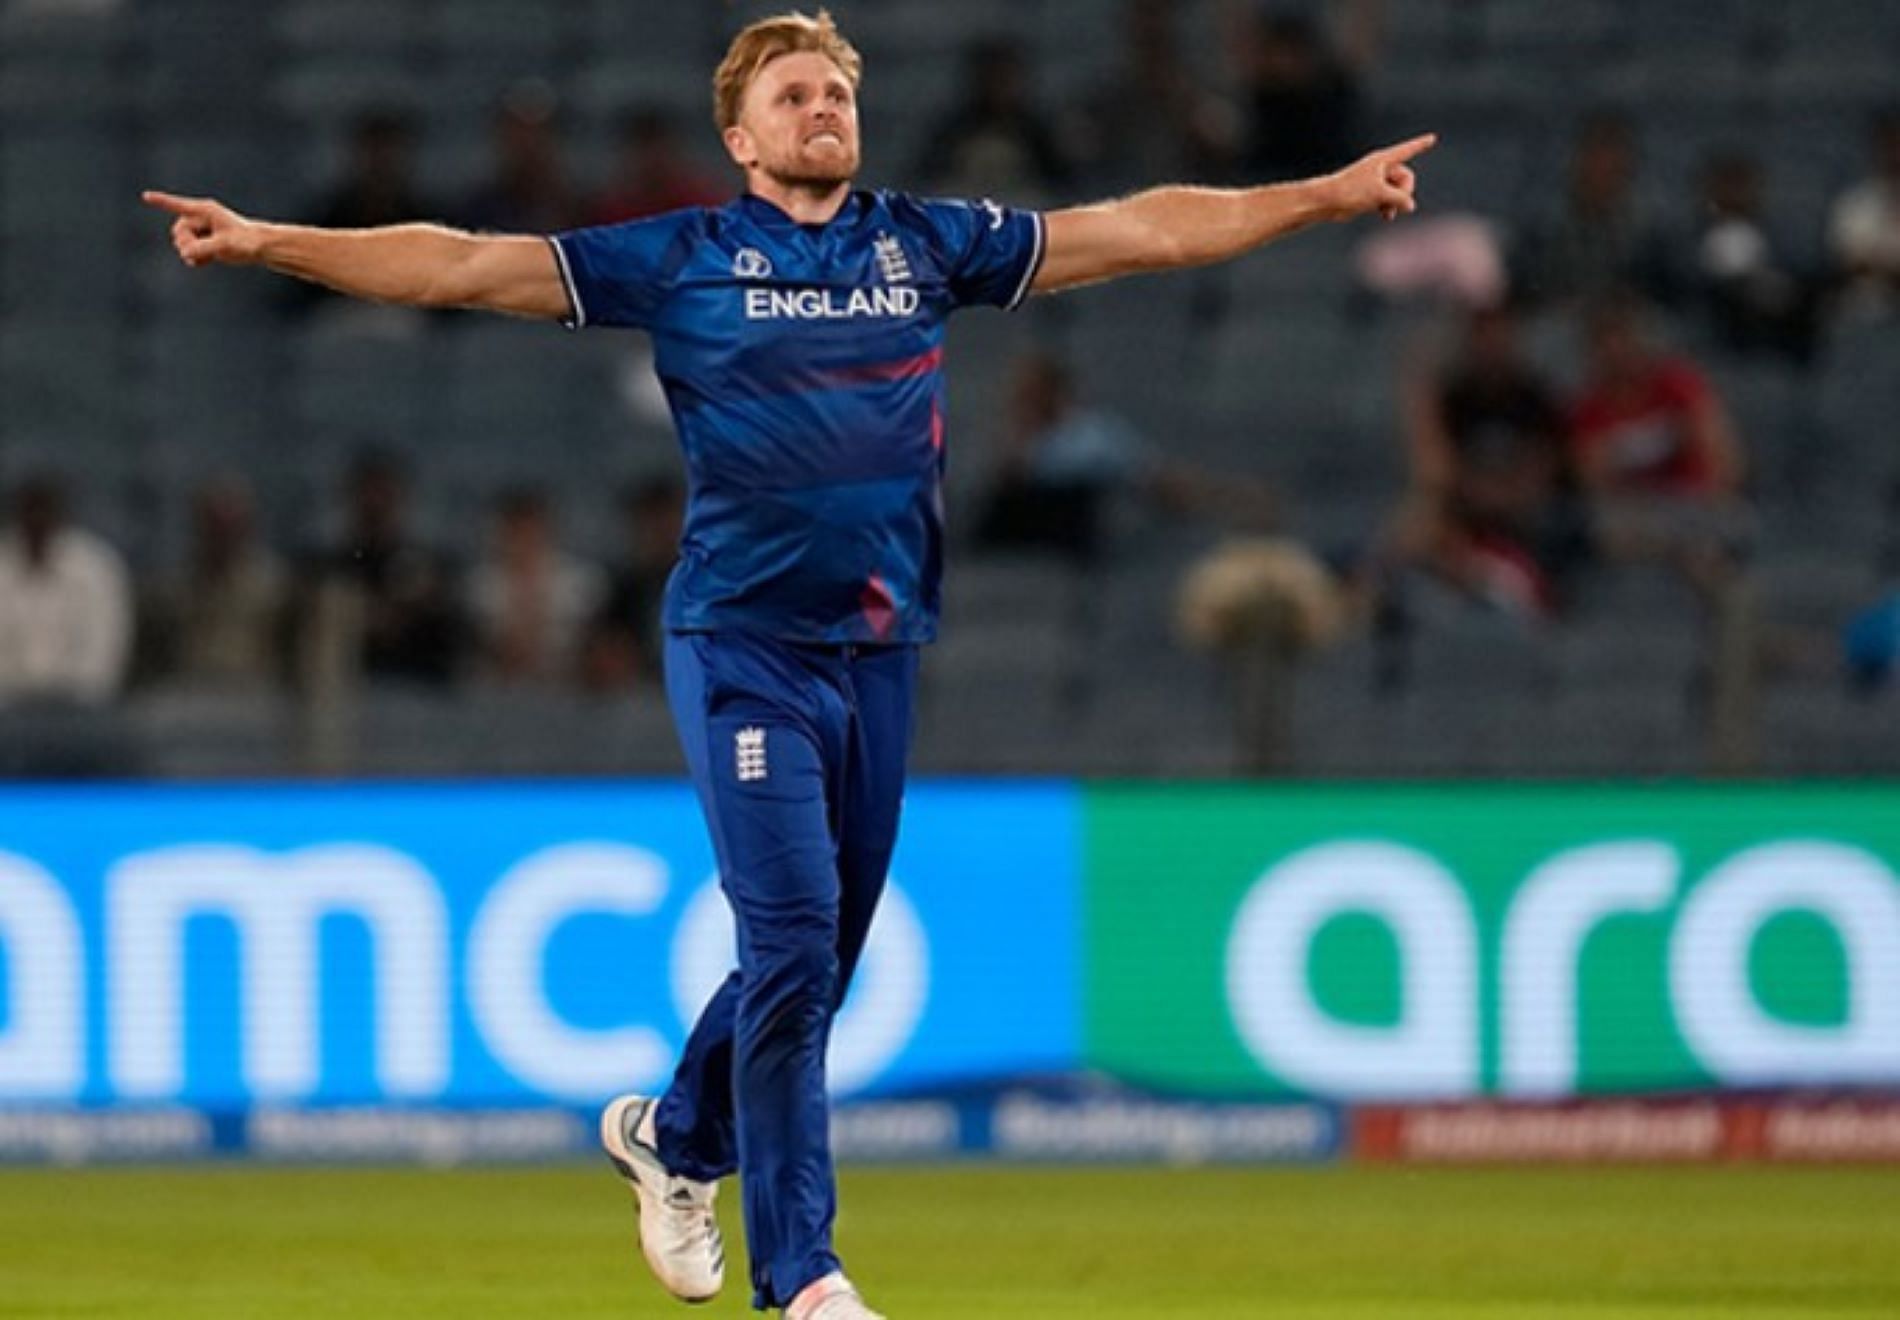 David Willey was among the few shining lights in a dim World Cup for England.